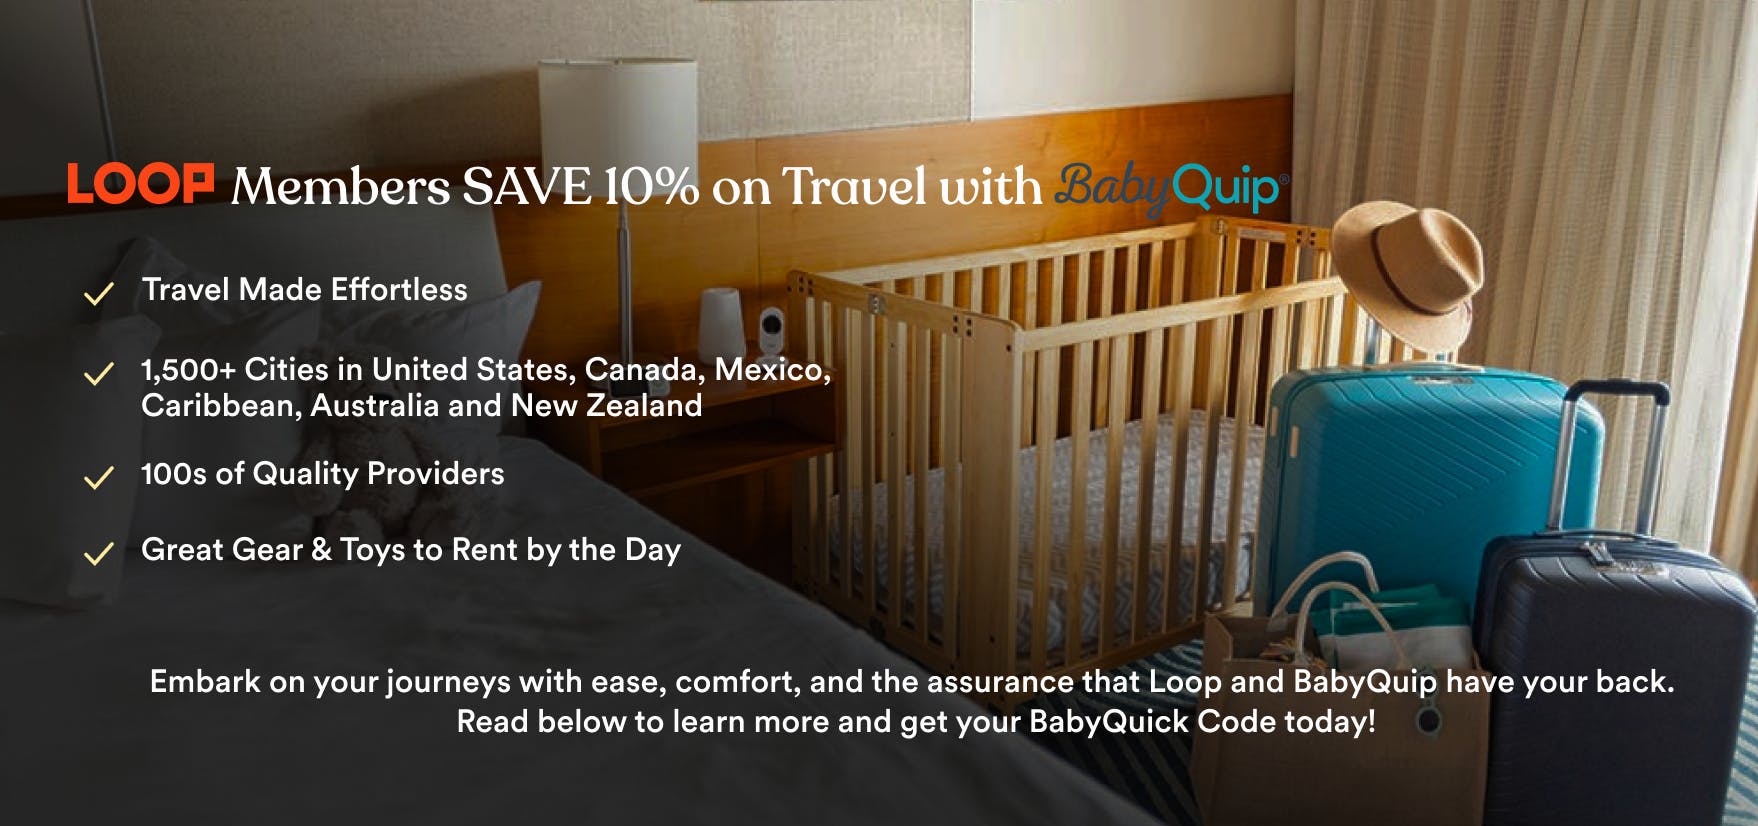 Loop Members Save 10% on Travel with BabyQuip